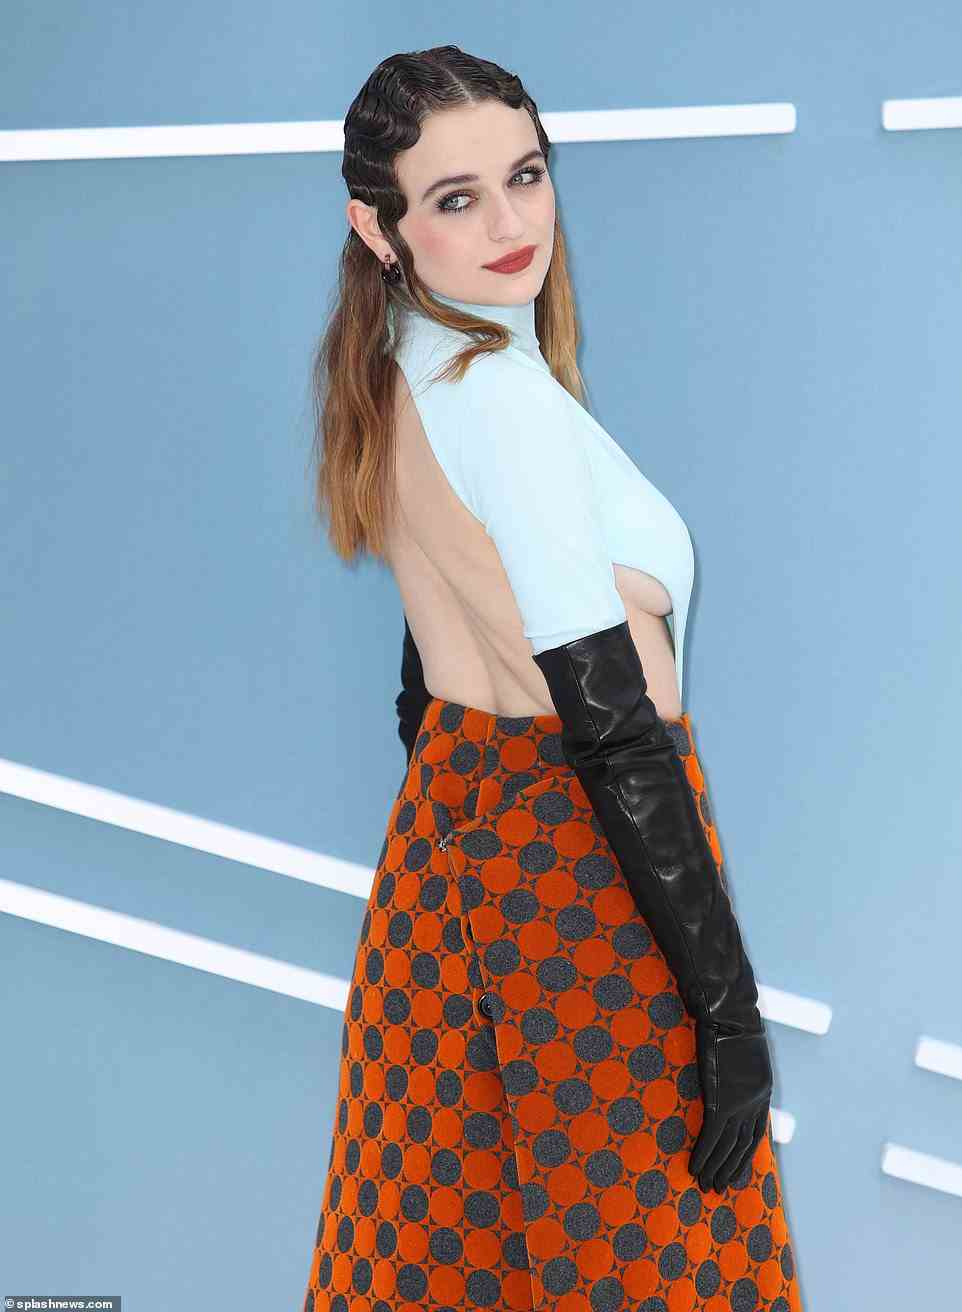 Sizzling: Joey set pulses racing in the edgy fitted top which she teamed with leather gloves and a 70s-inspired skirt as she posed on the white carpet at Cineworld in Leicester Square